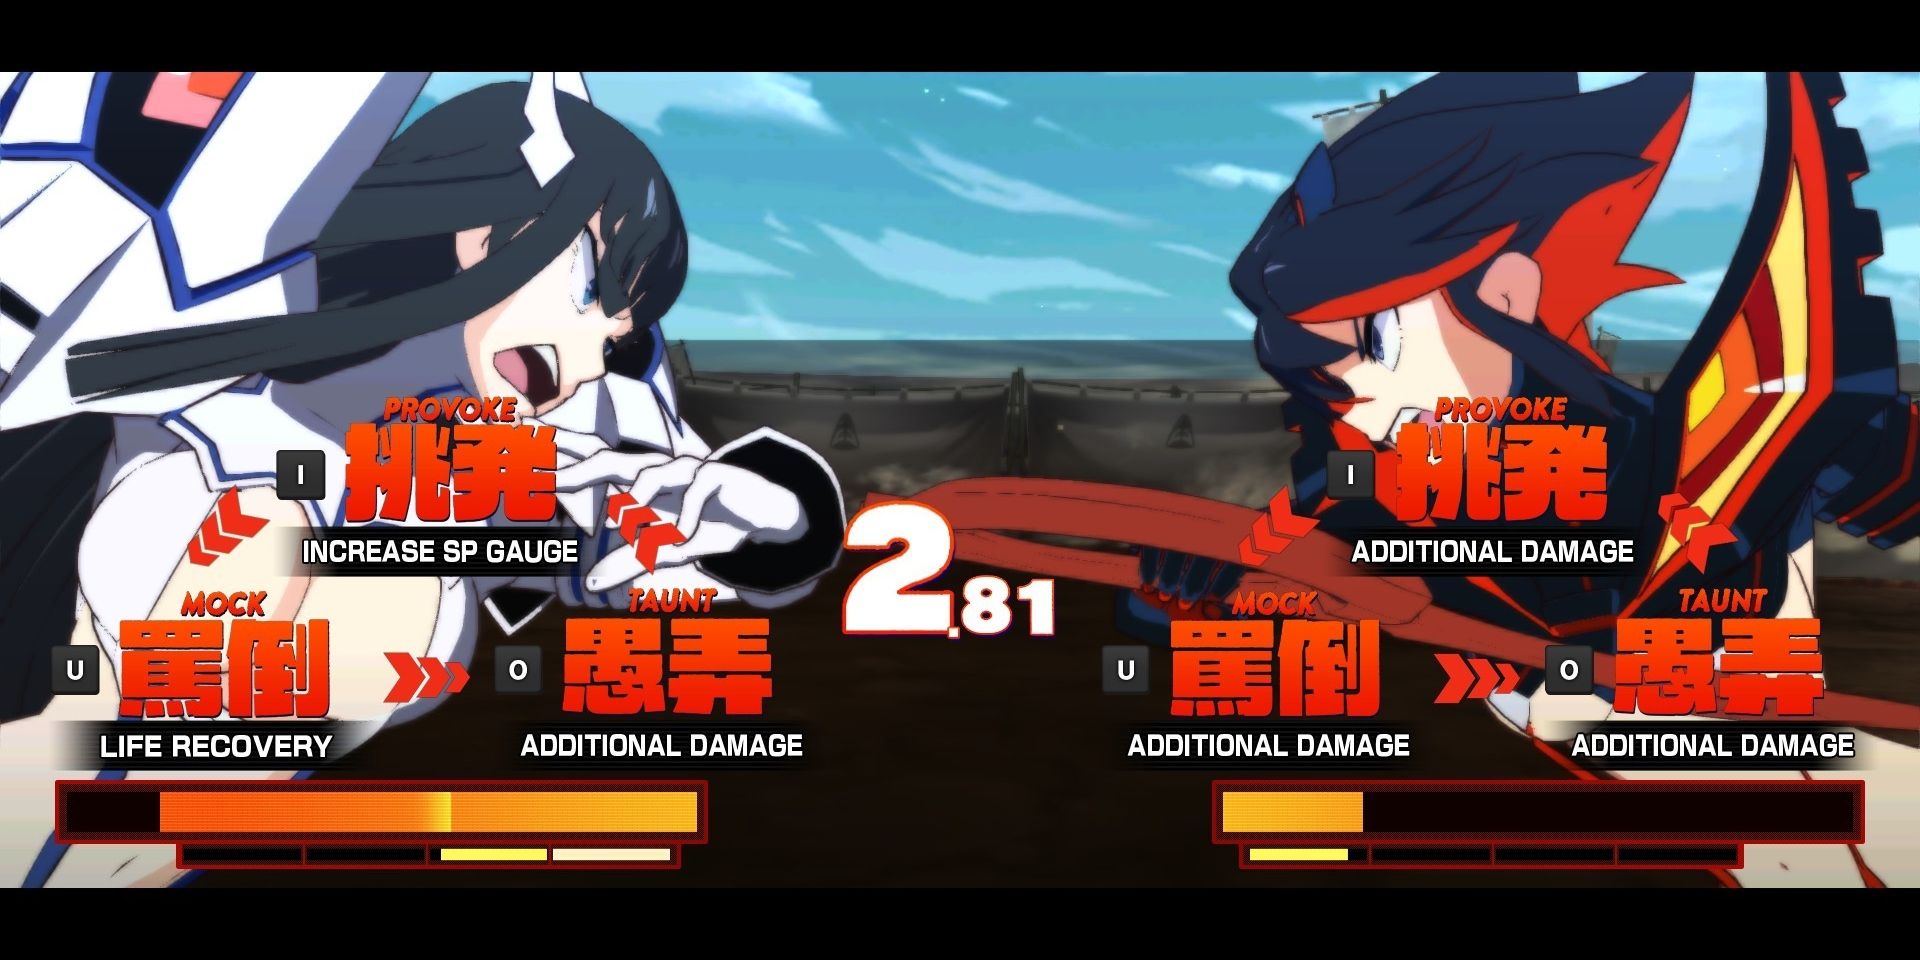 Ryuko and Satsuki facing each other on the versus screen before battle